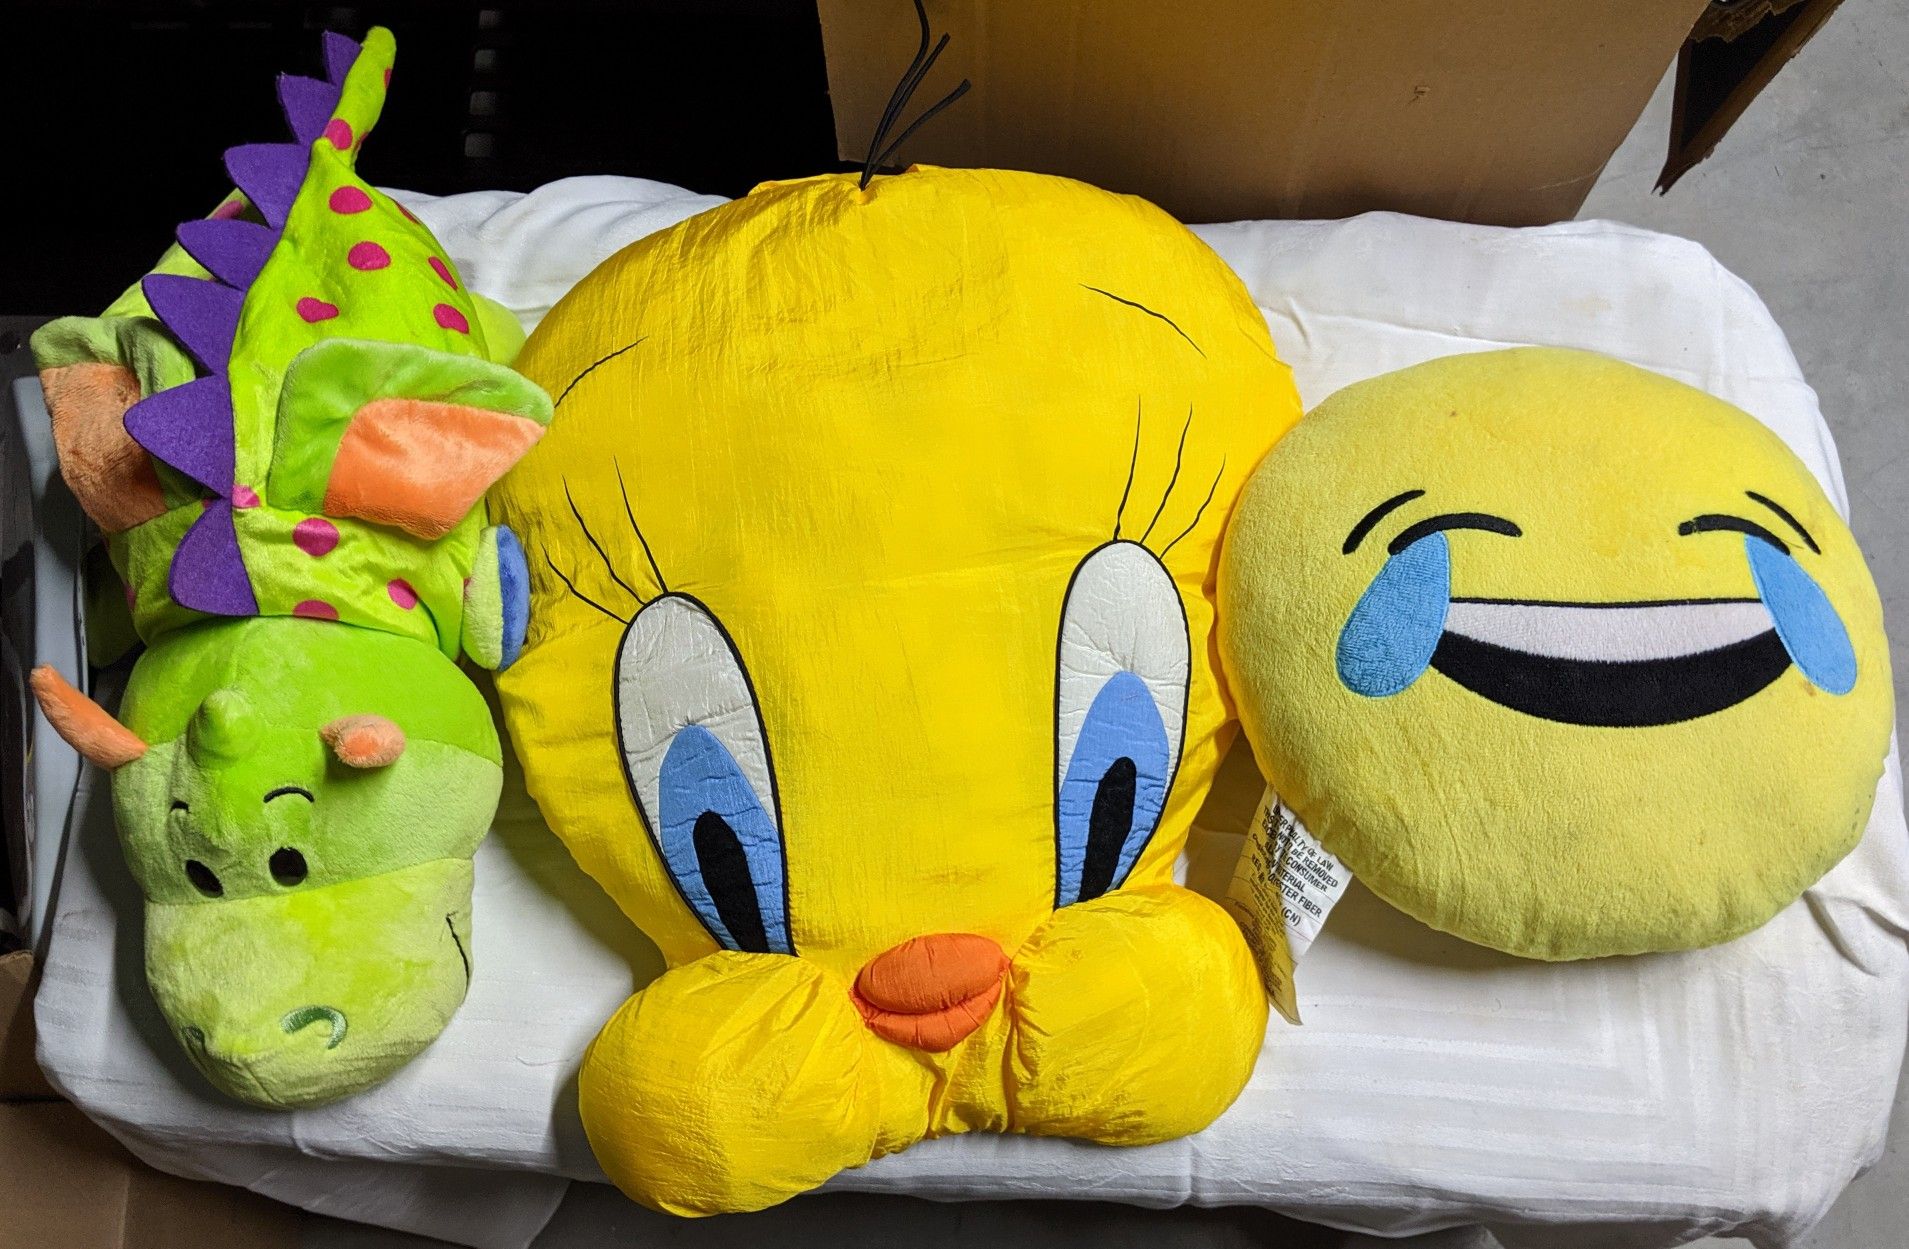 Soft Character Pillows and Stuffed Animals